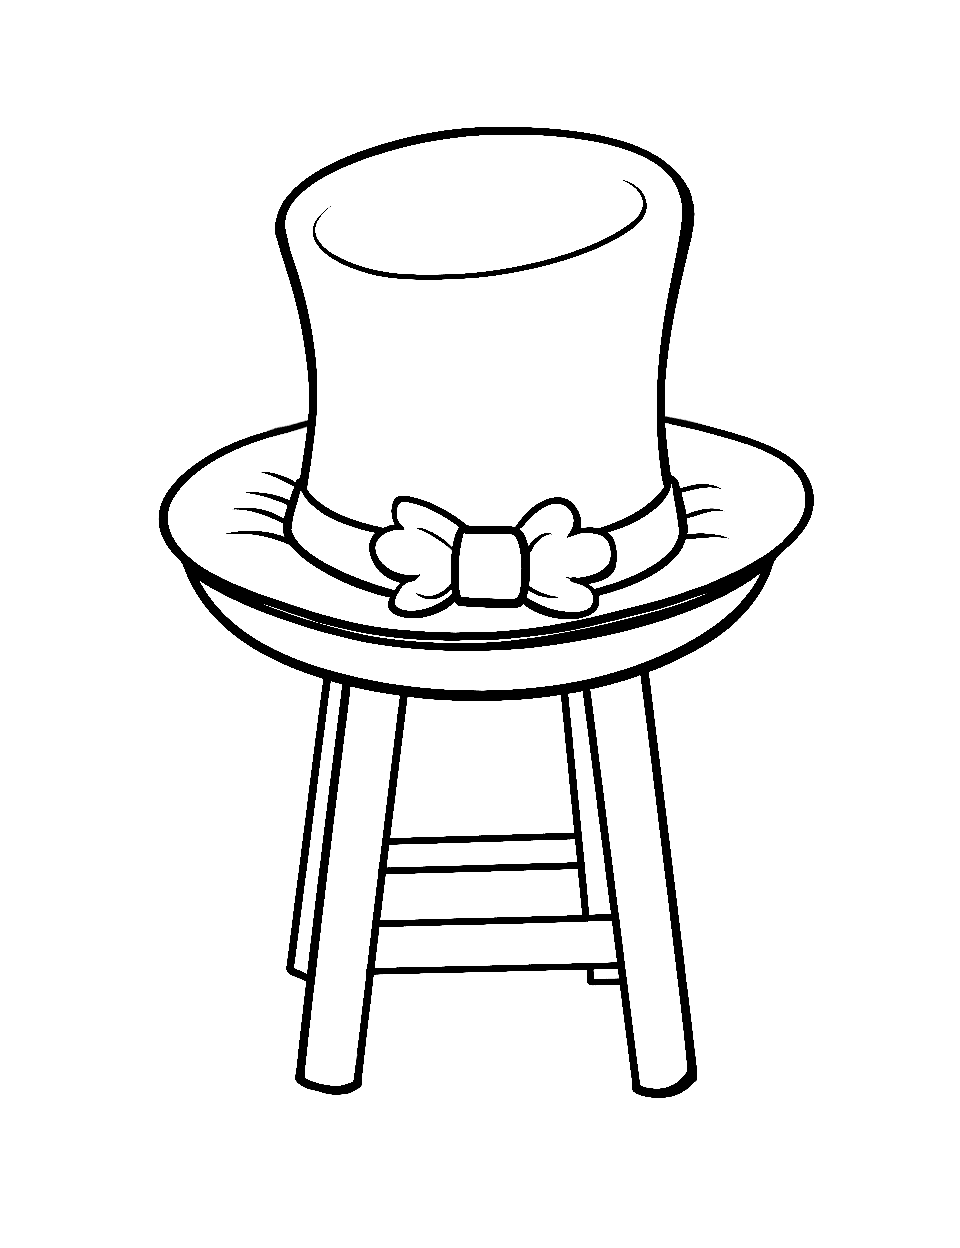 Leprechaun Hat on a Stool Coloring Page - A leprechaun’s hat left unattended on a wooden stool.